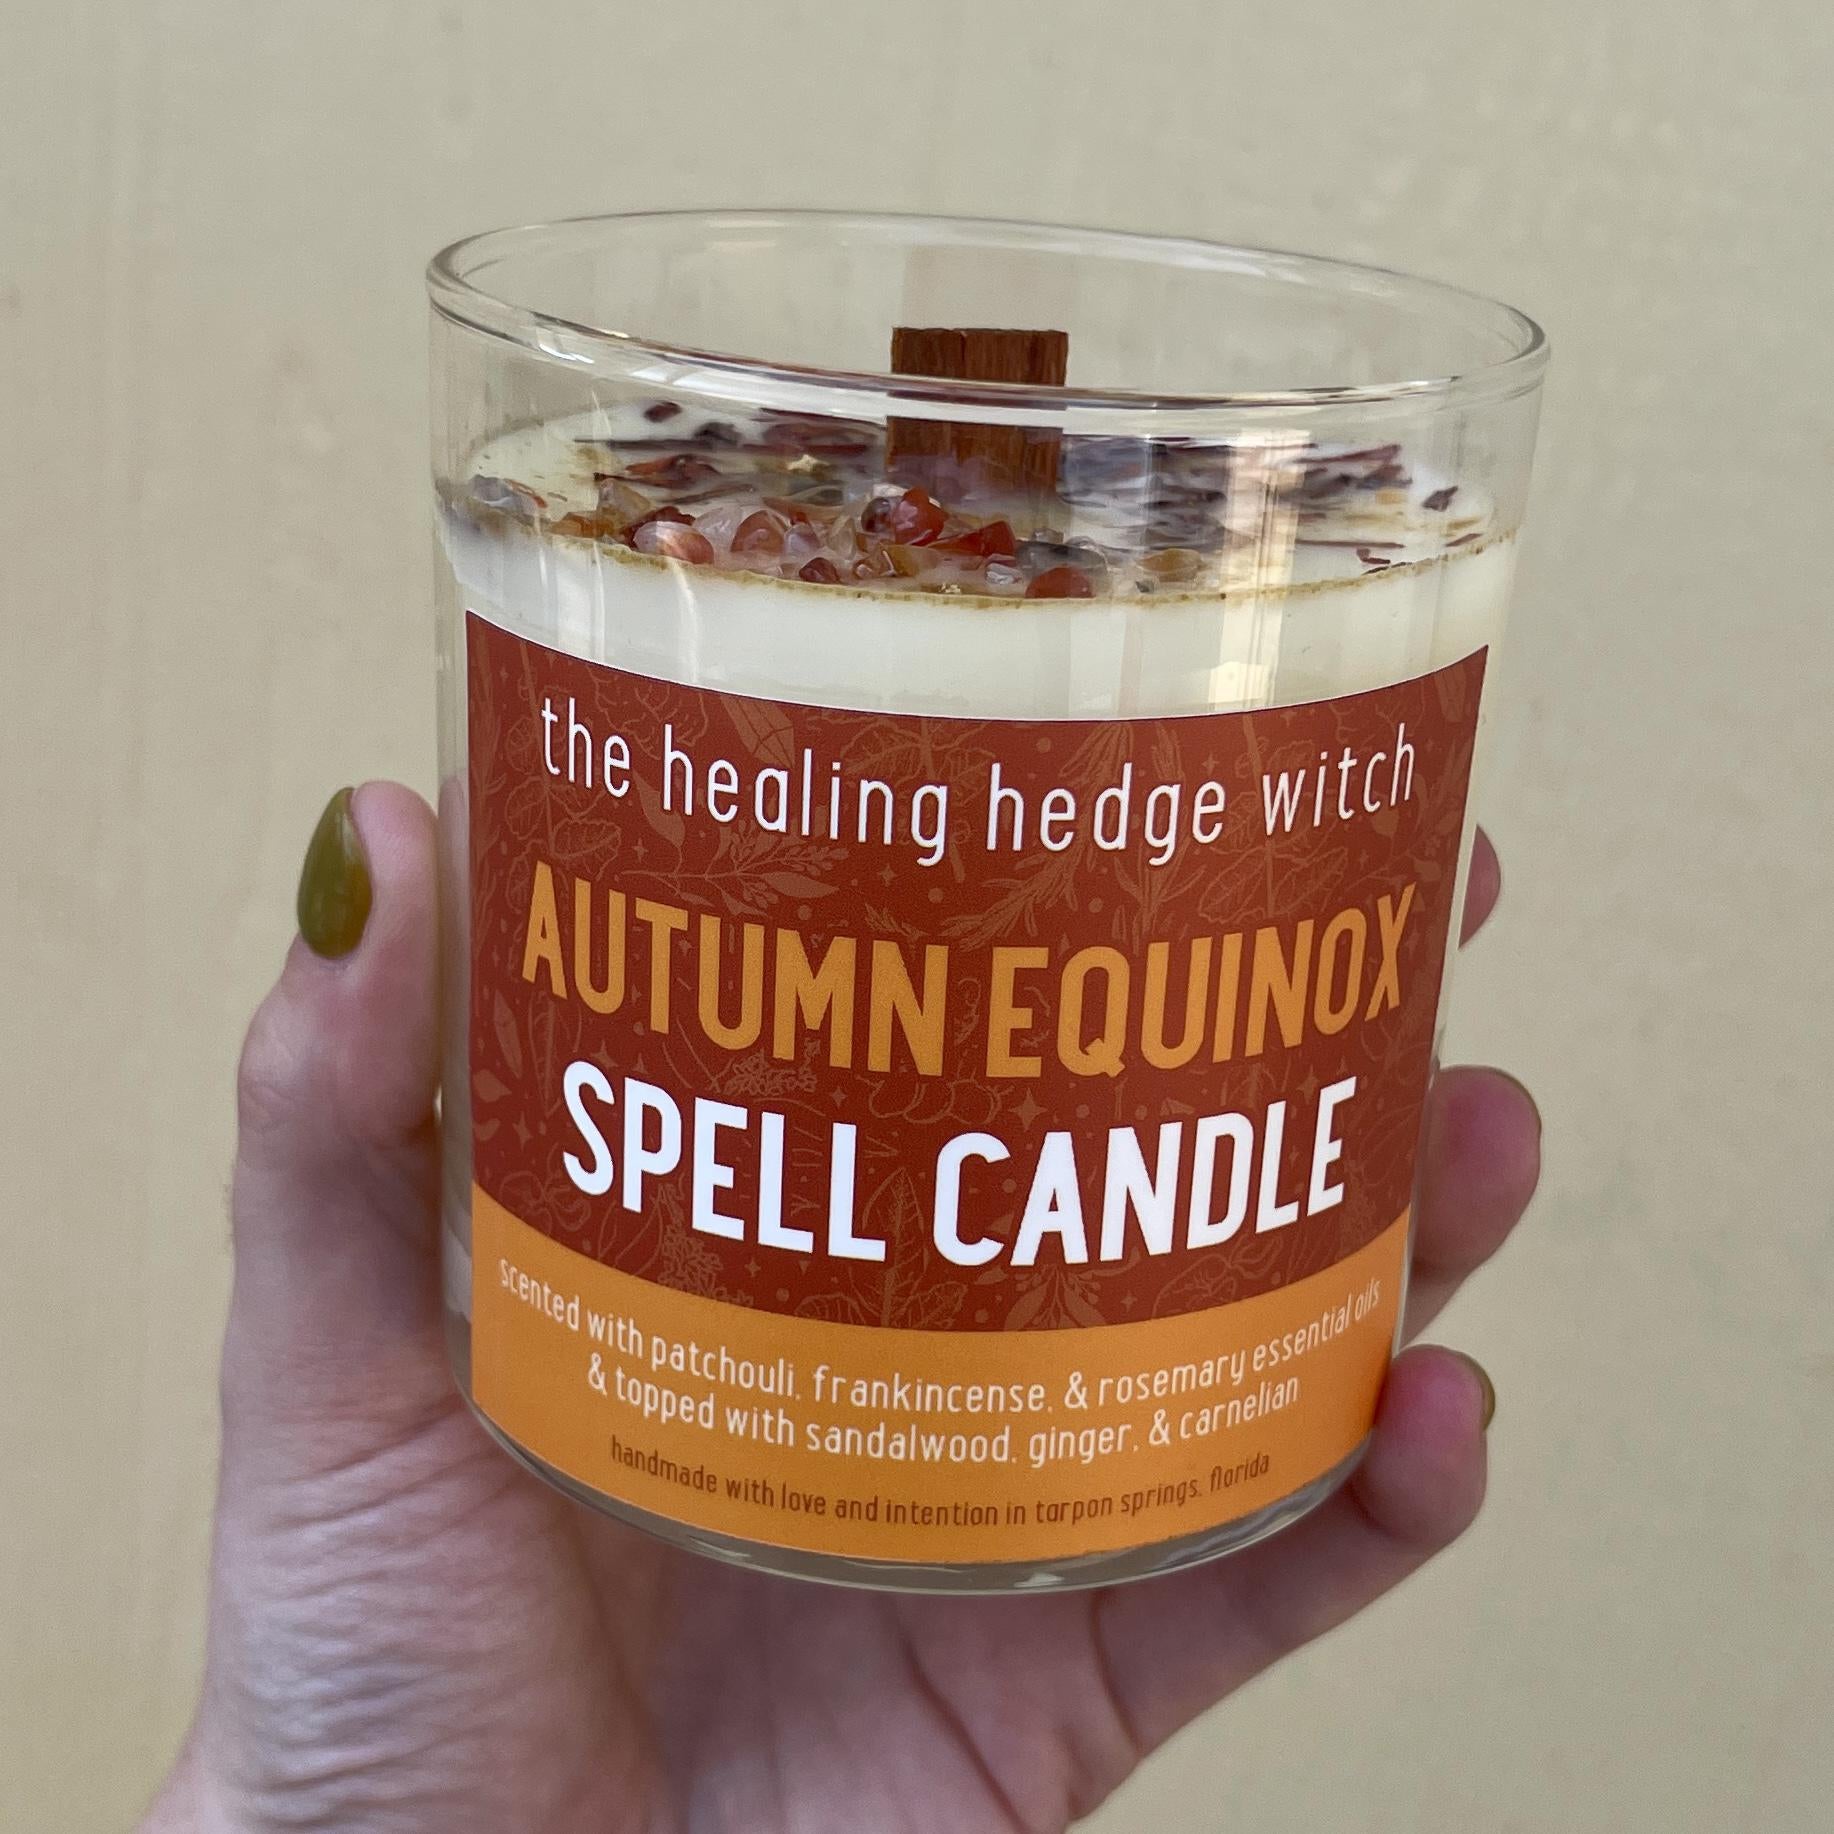 Autumn Equinox Spell Candle